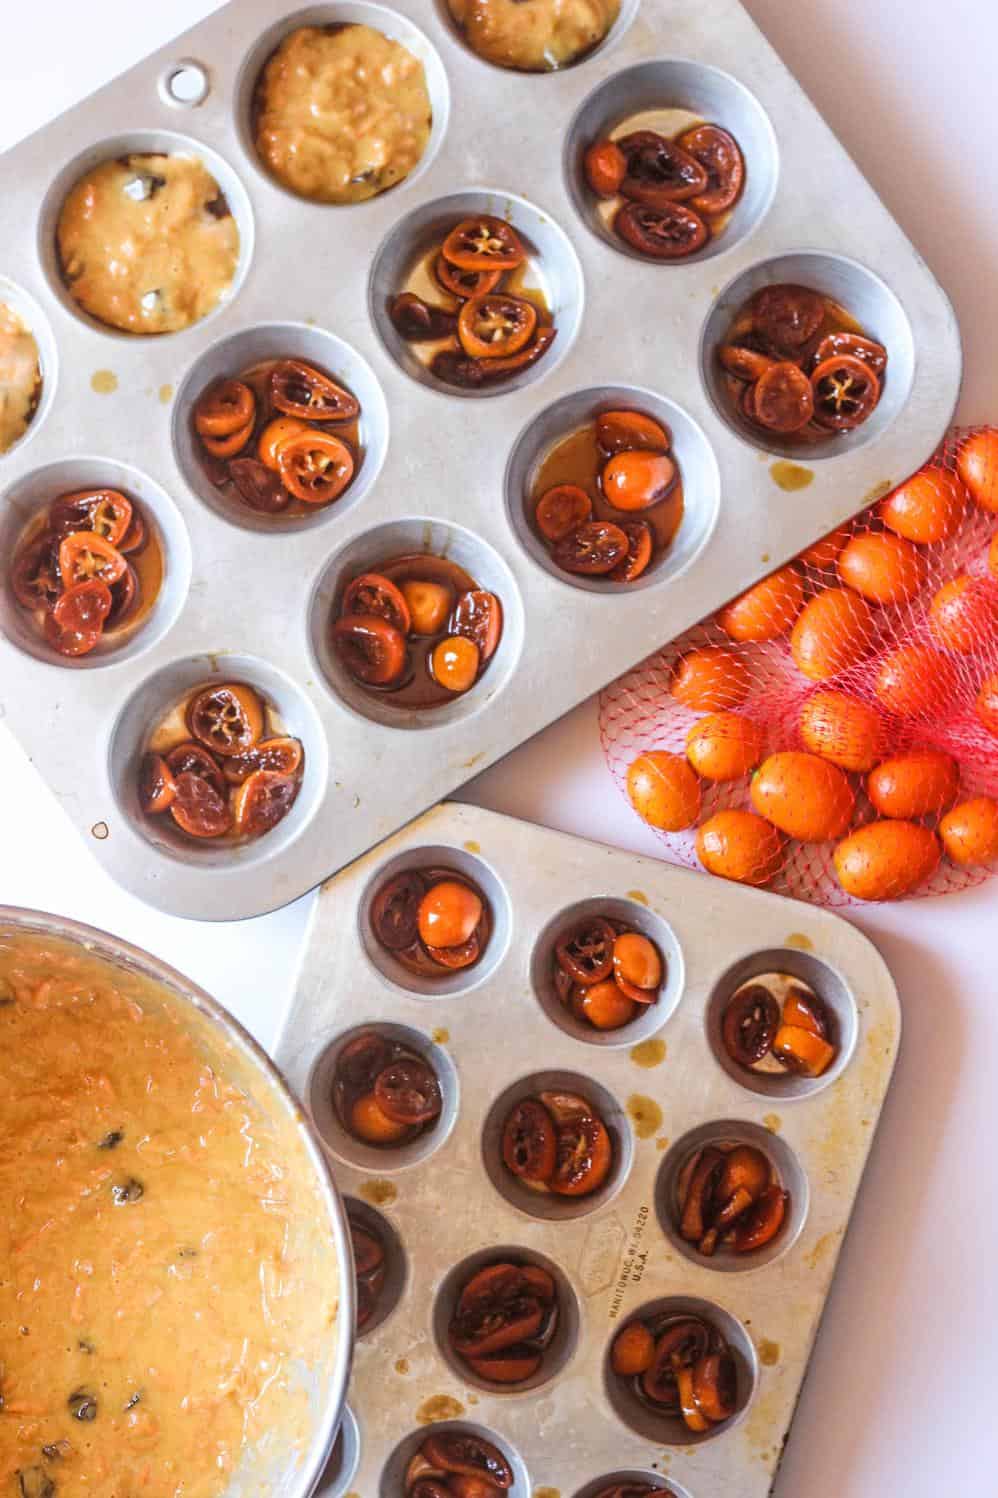  Kumquat is the star of the show in these tasty breakfast treats.